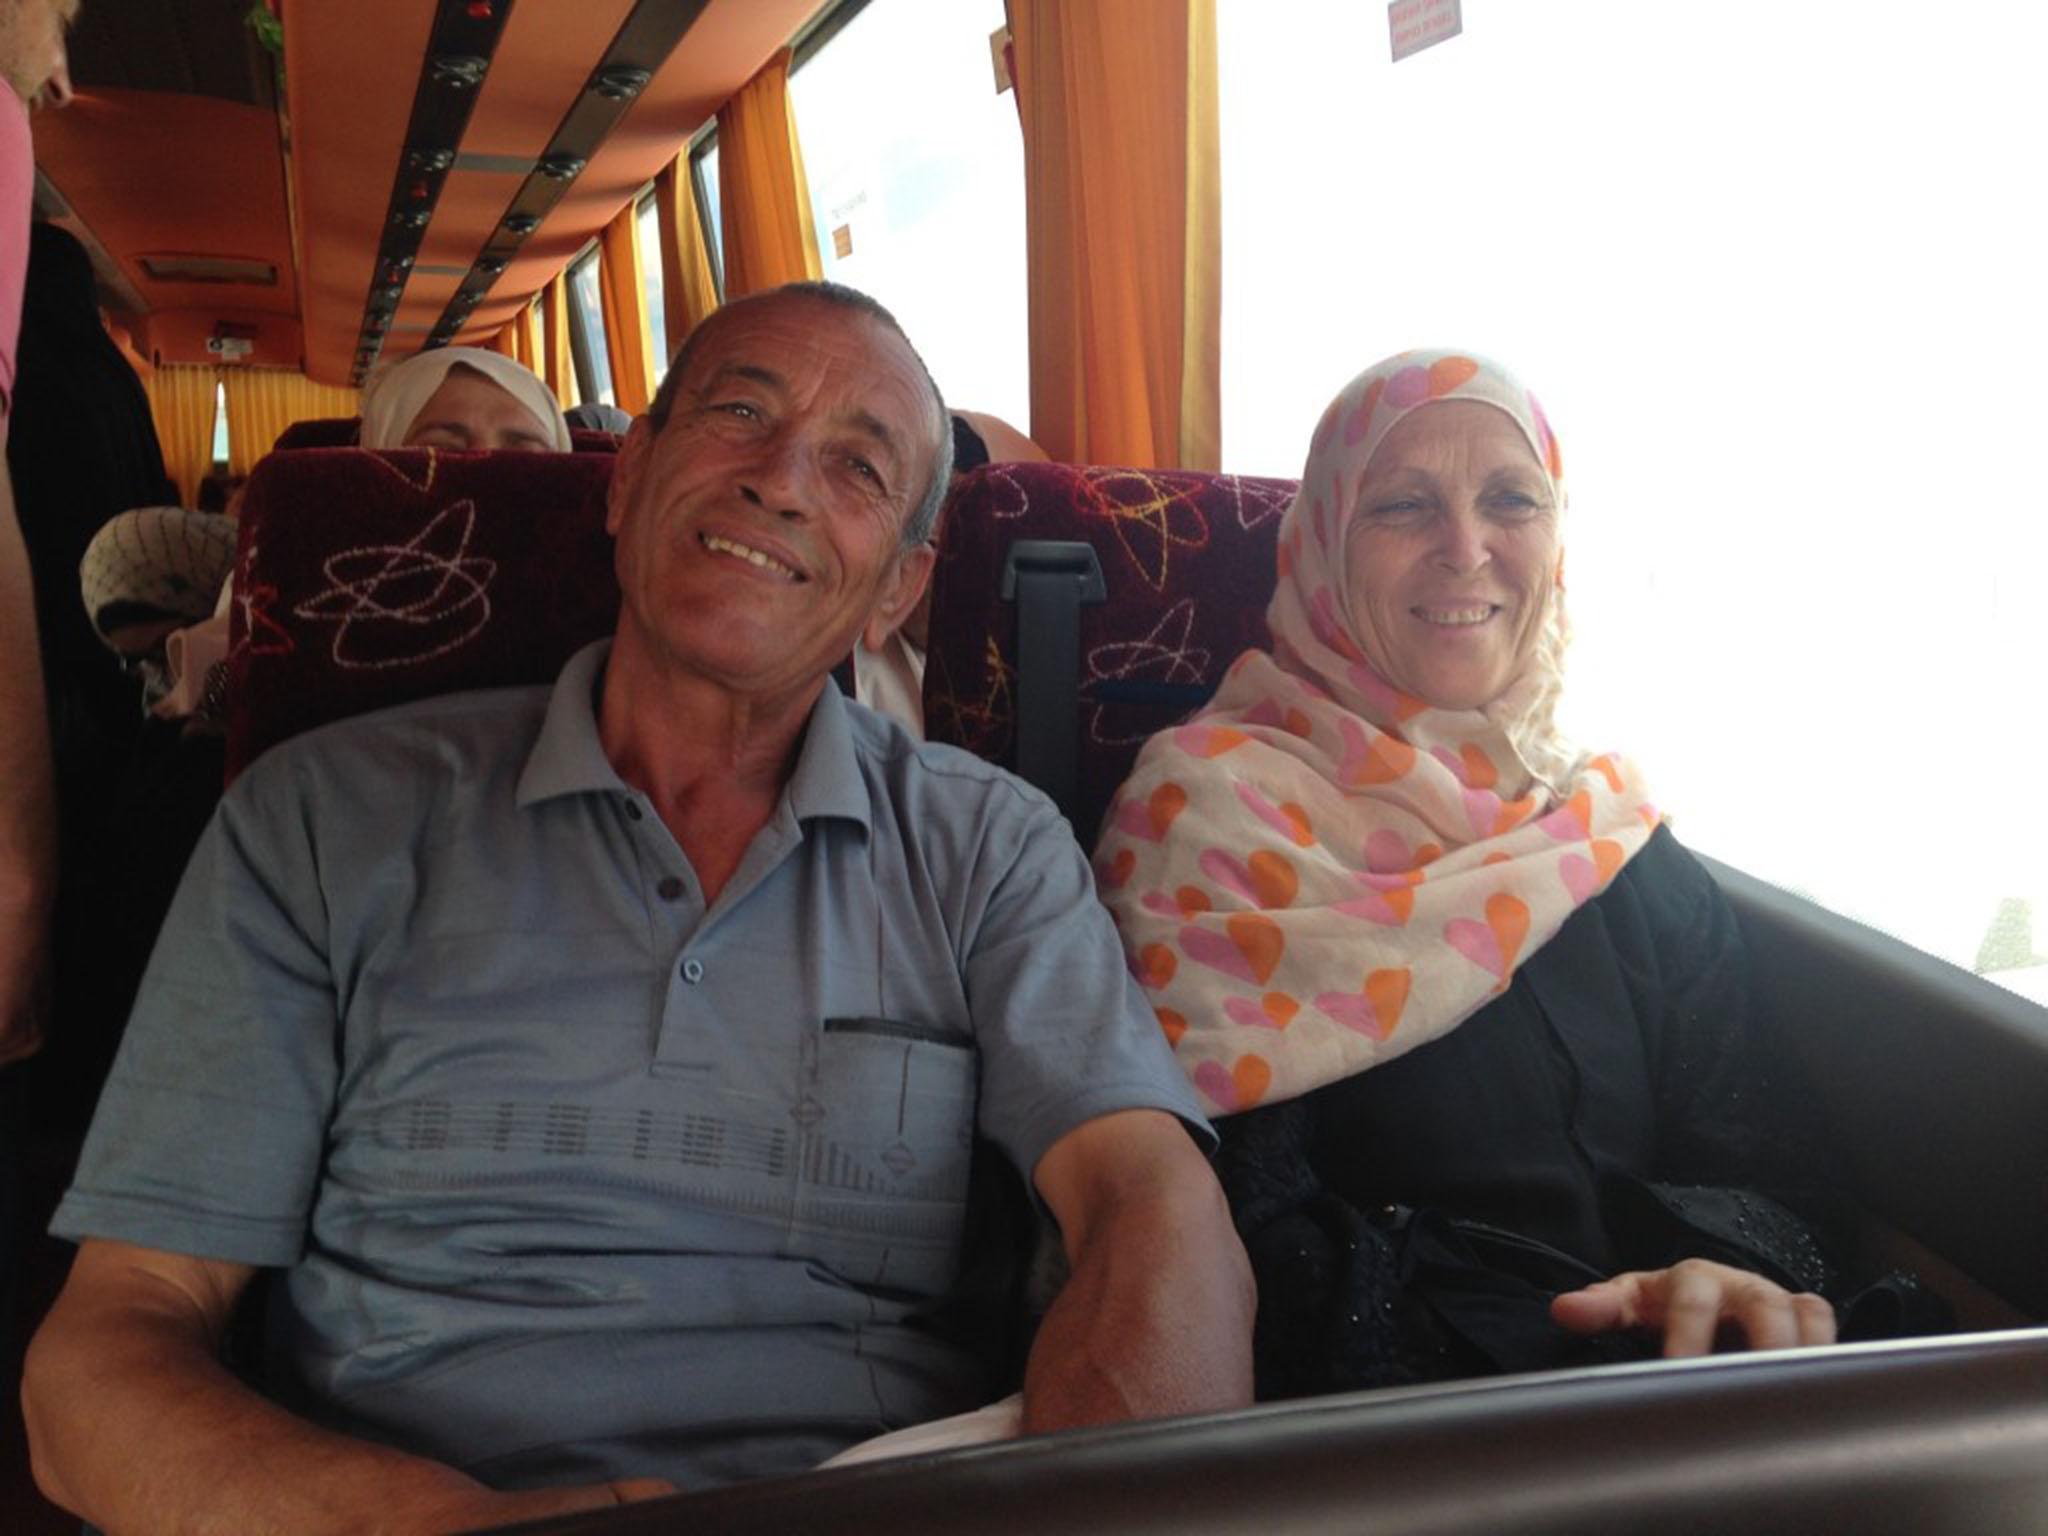 Faisal and Huda Buhasi and her husband Faisal wanted to pray at the al-Aqsa Mosque ‘one more time’